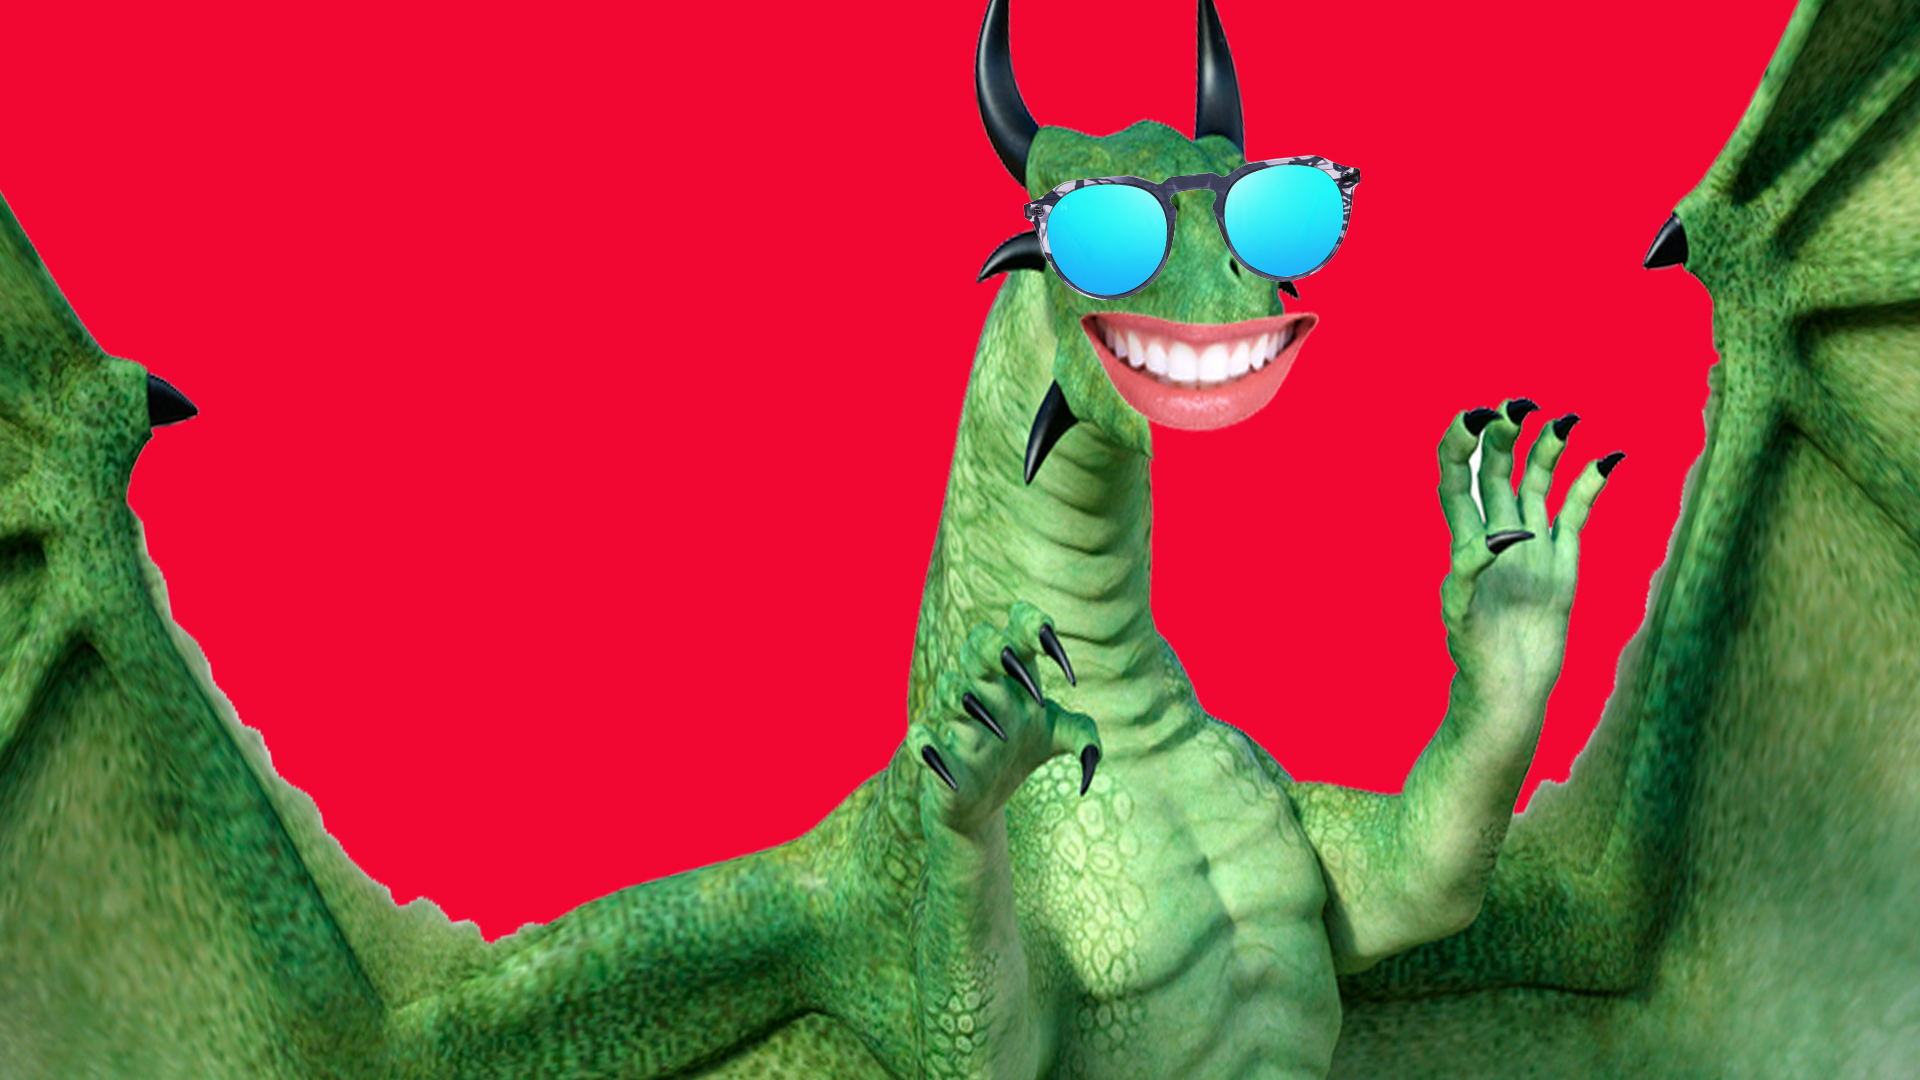 A smiling dragon wearing sunglasses